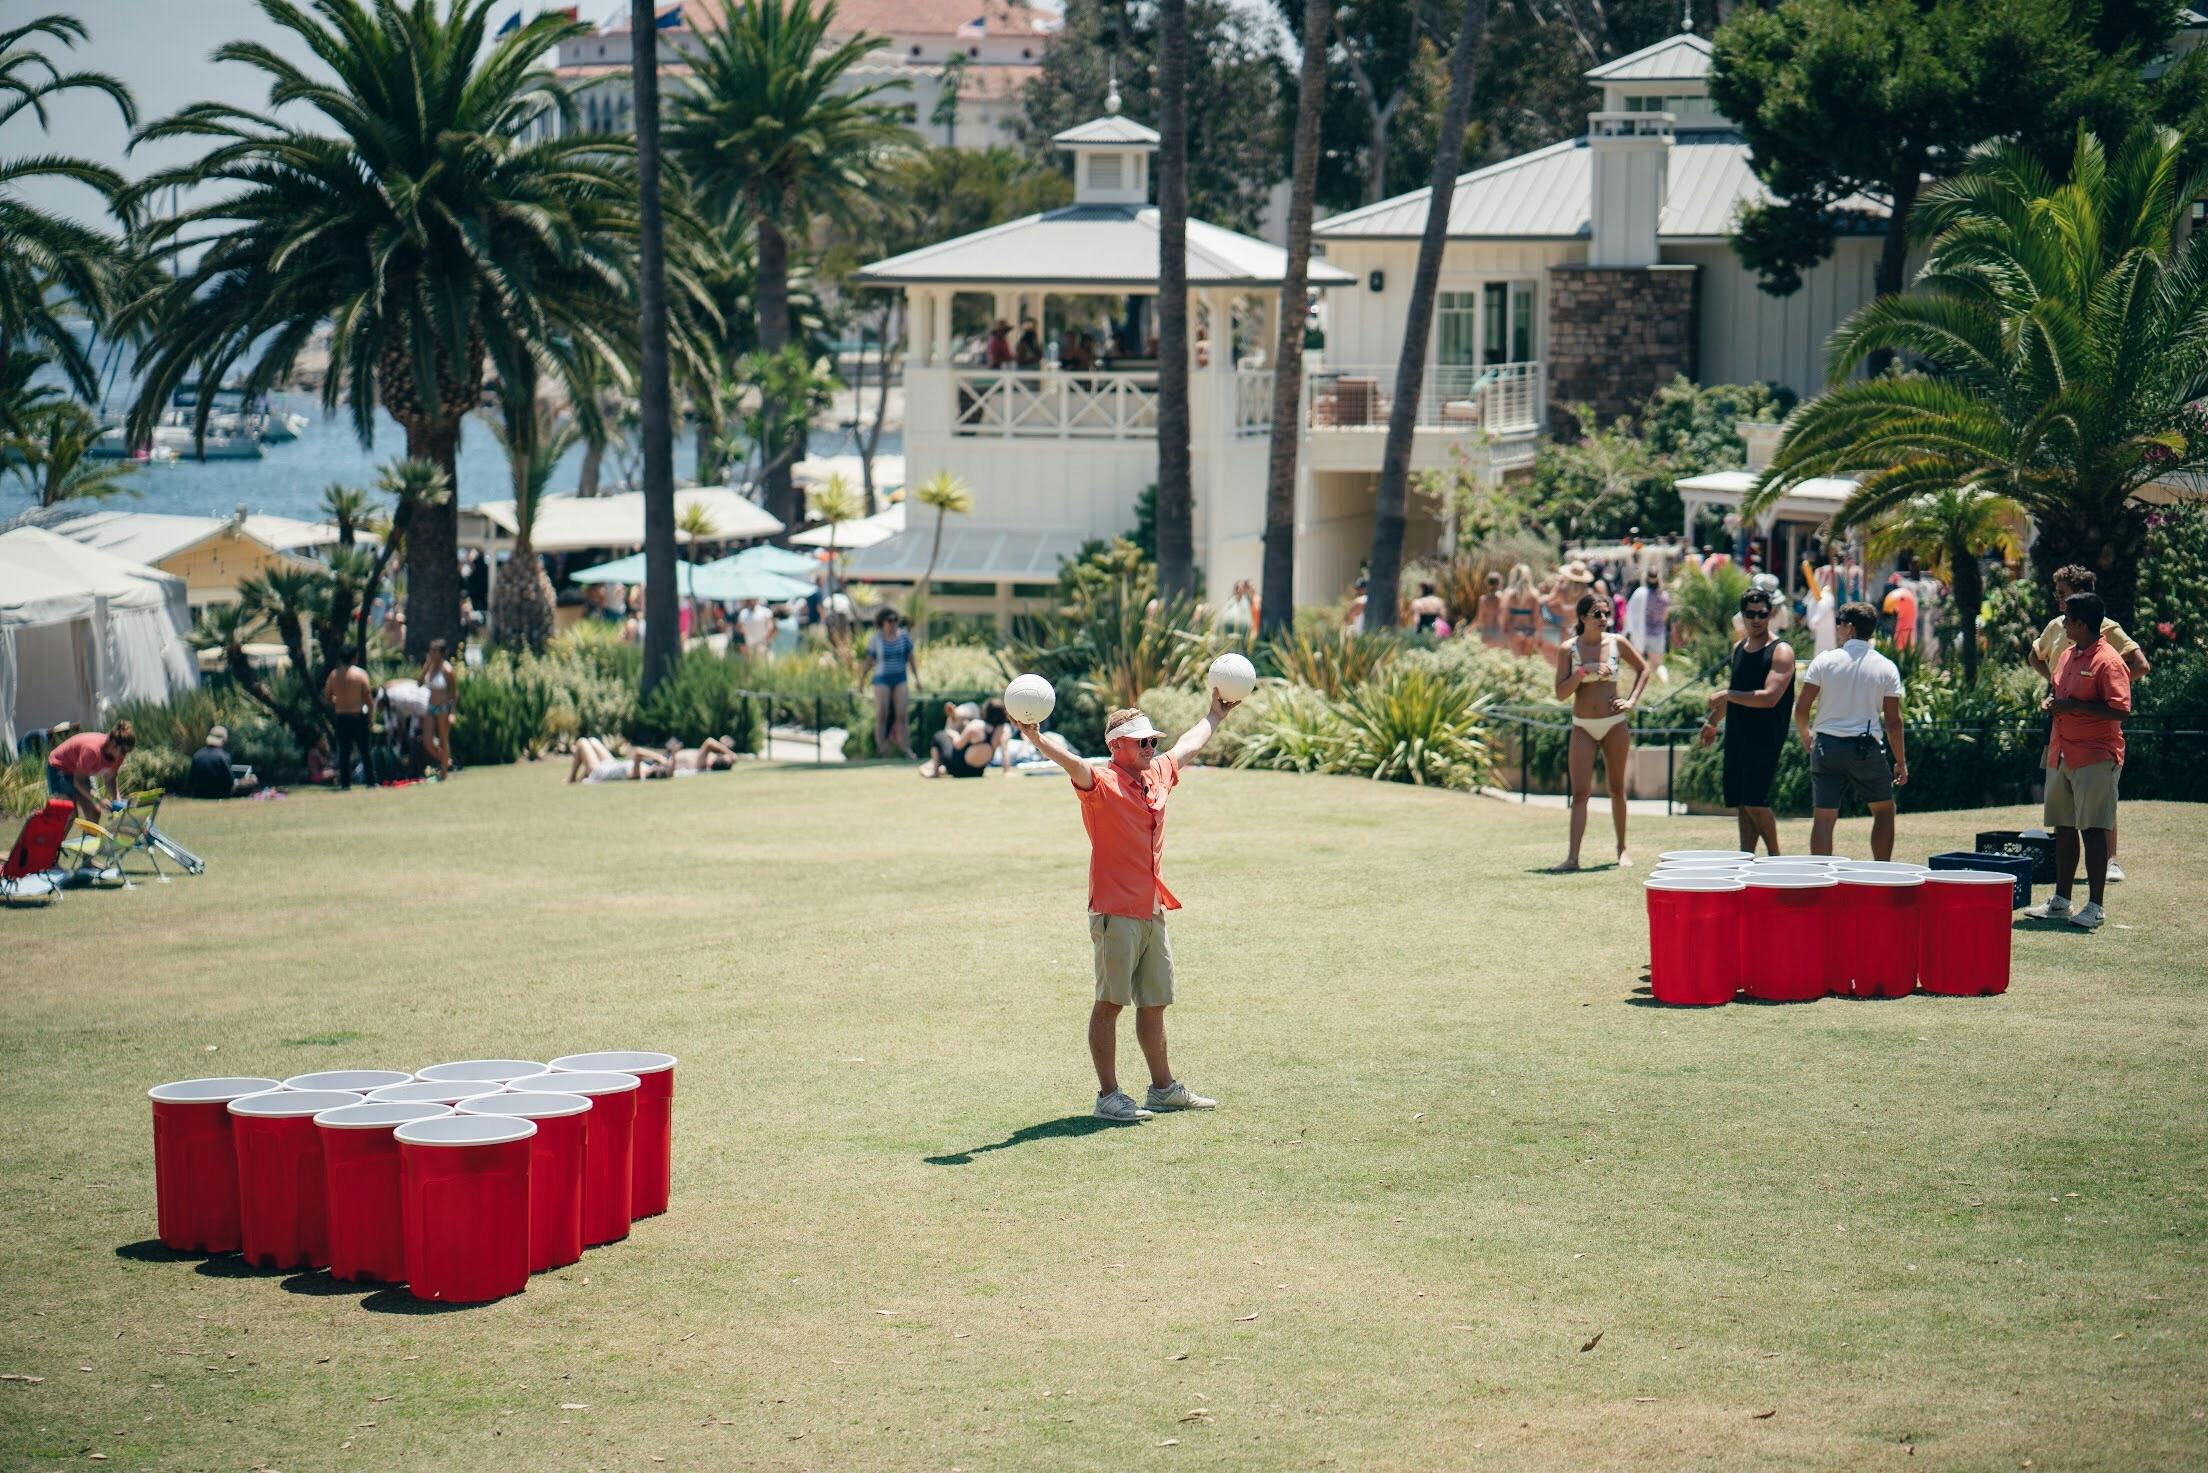 Nothing like life-size beer pong on the beach!